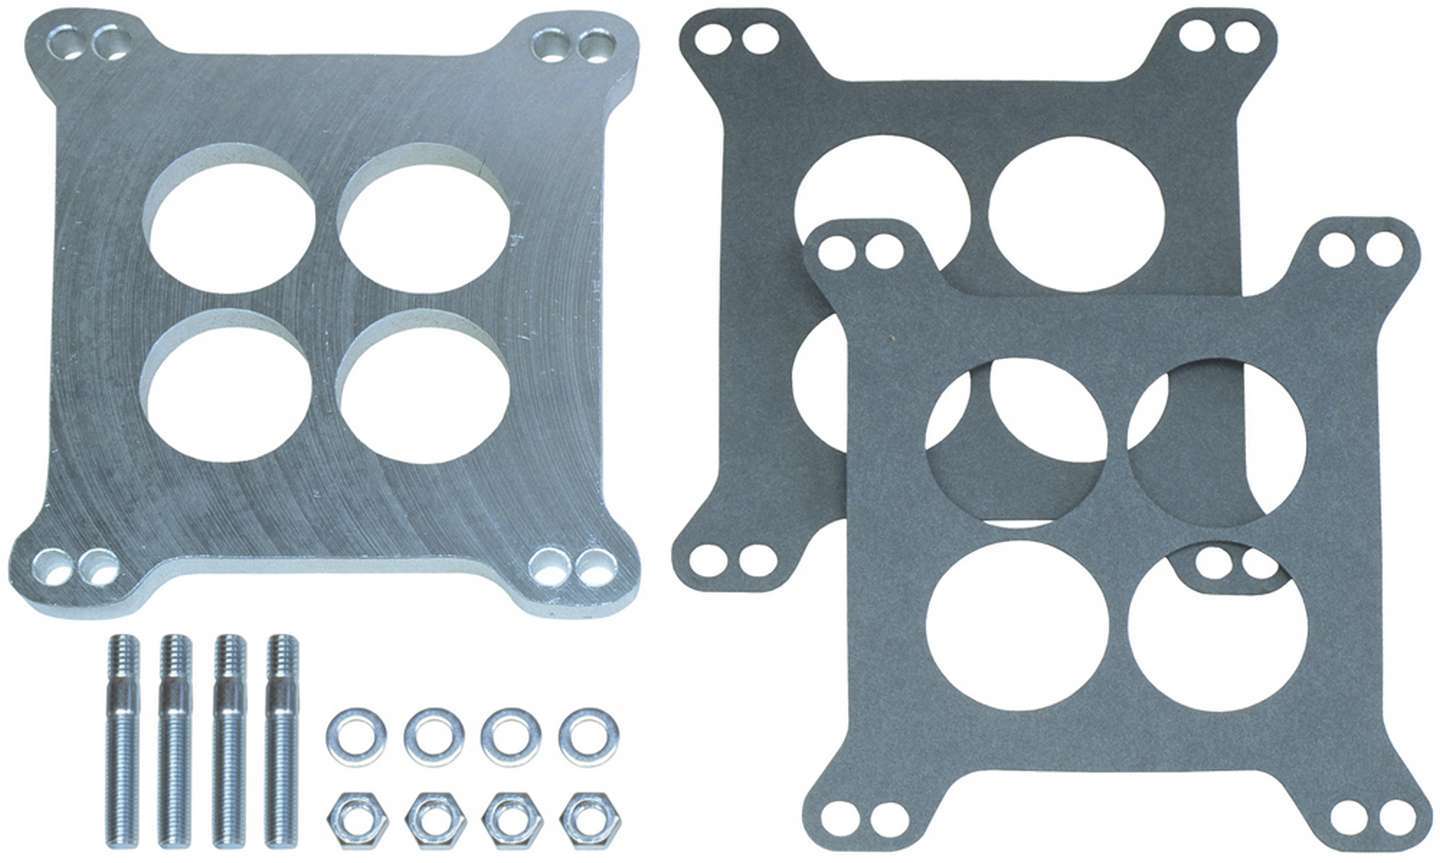 Trans Dapt 2280 Carburetor Spacer, 3/8 in Thick, 4 Hole, Square Bore, Gasket / Hardware Included, Aluminum, Natural, Each